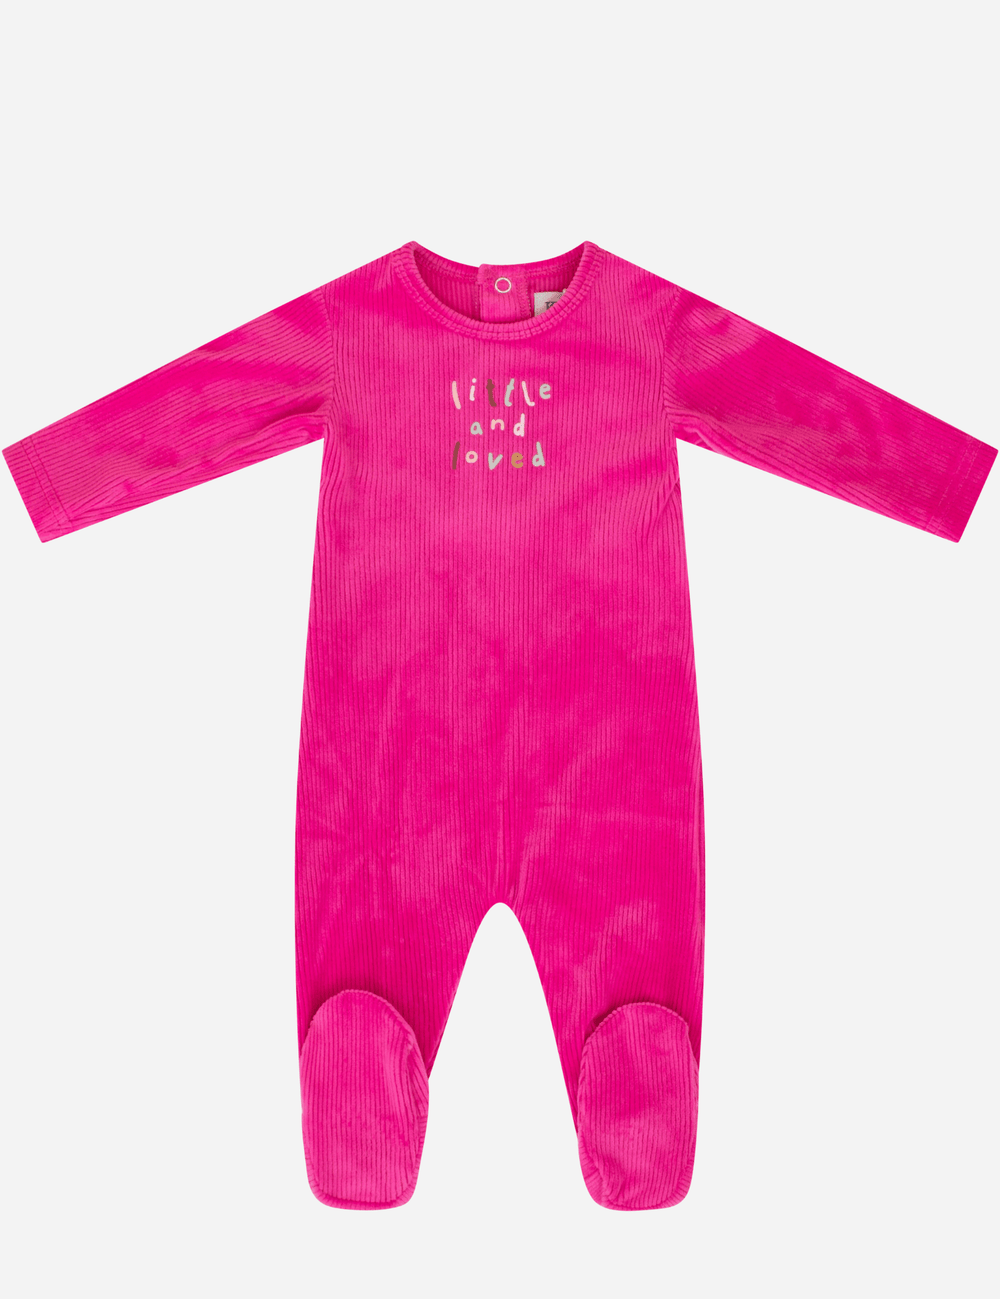 Little and Loved Romper - Pink